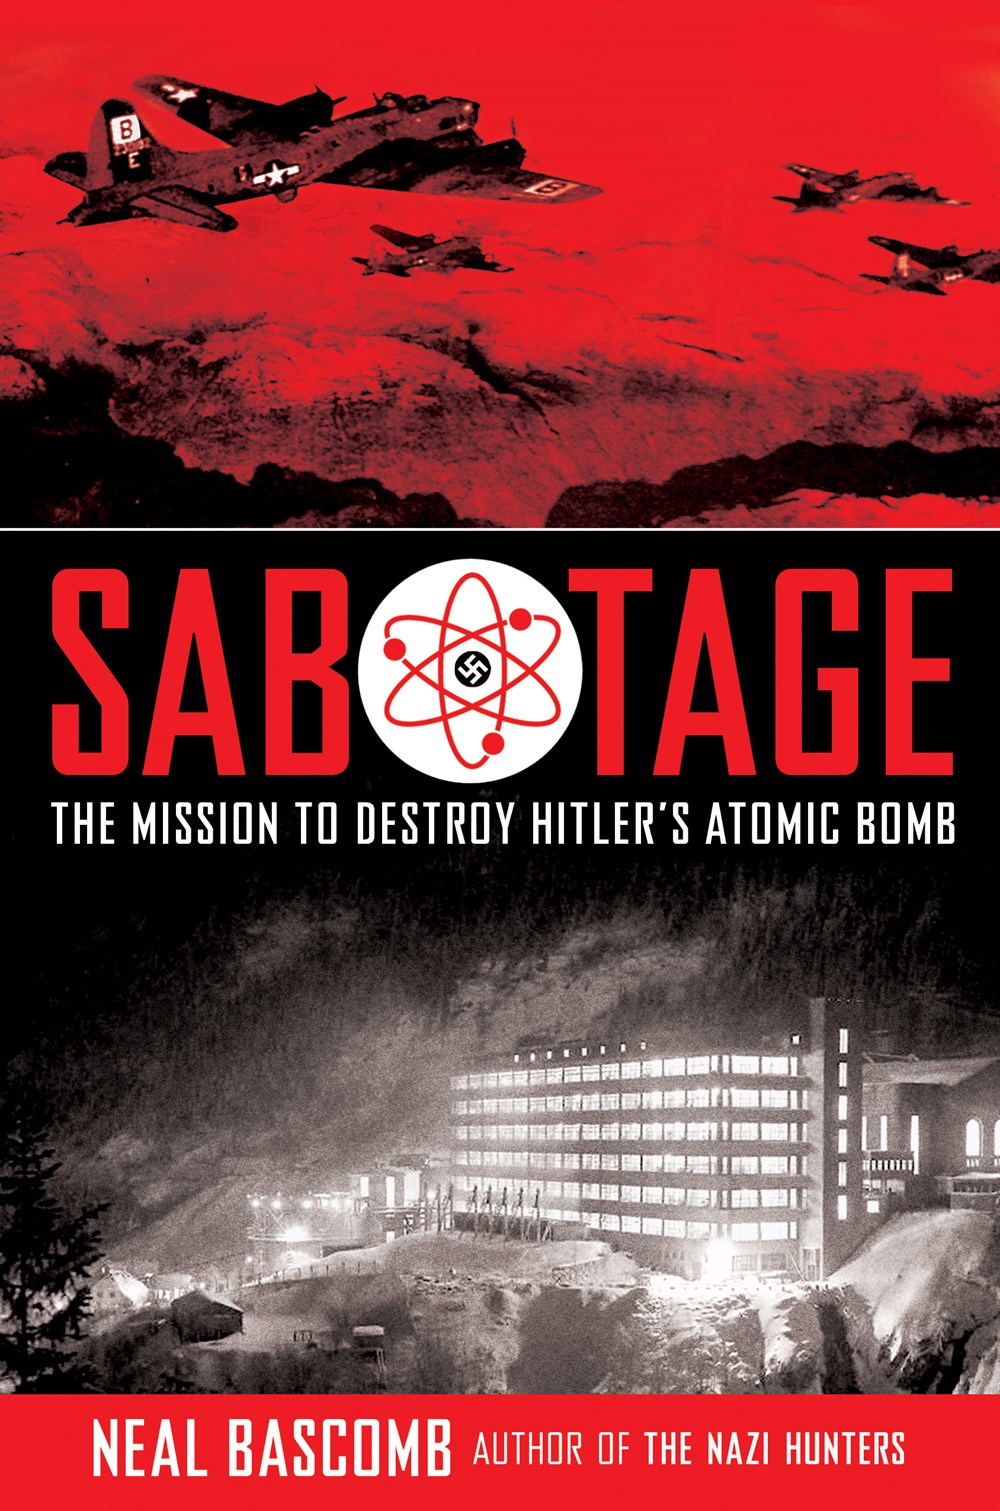 Sabotage: The Mission to Destroy Hitler’s Atomic Bomb: Young Adult Edition